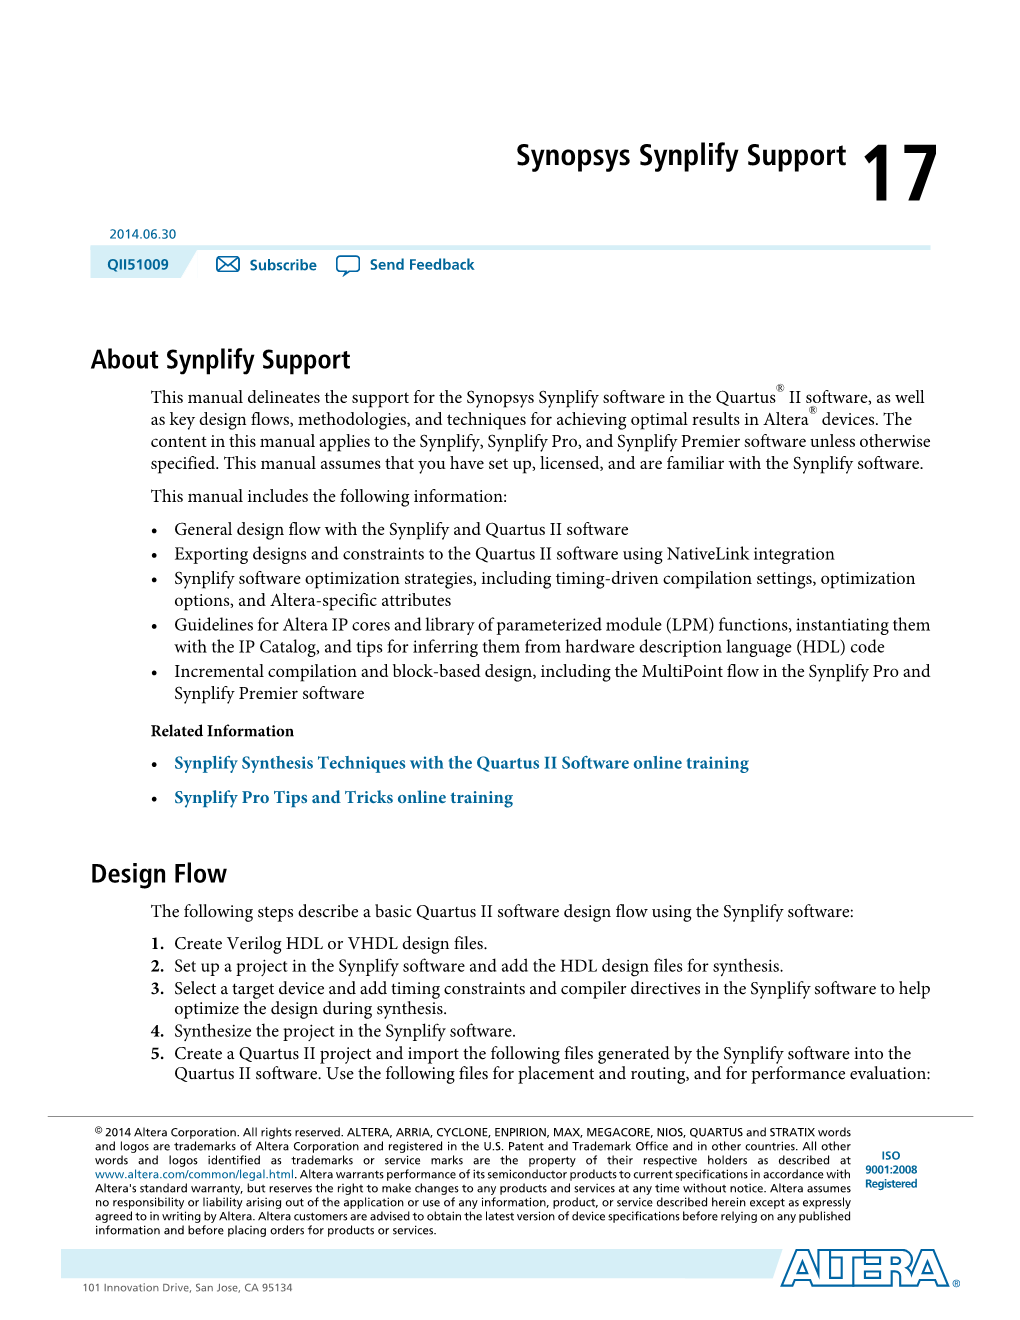 Synopsys Synplify Support 17 2014.06.30